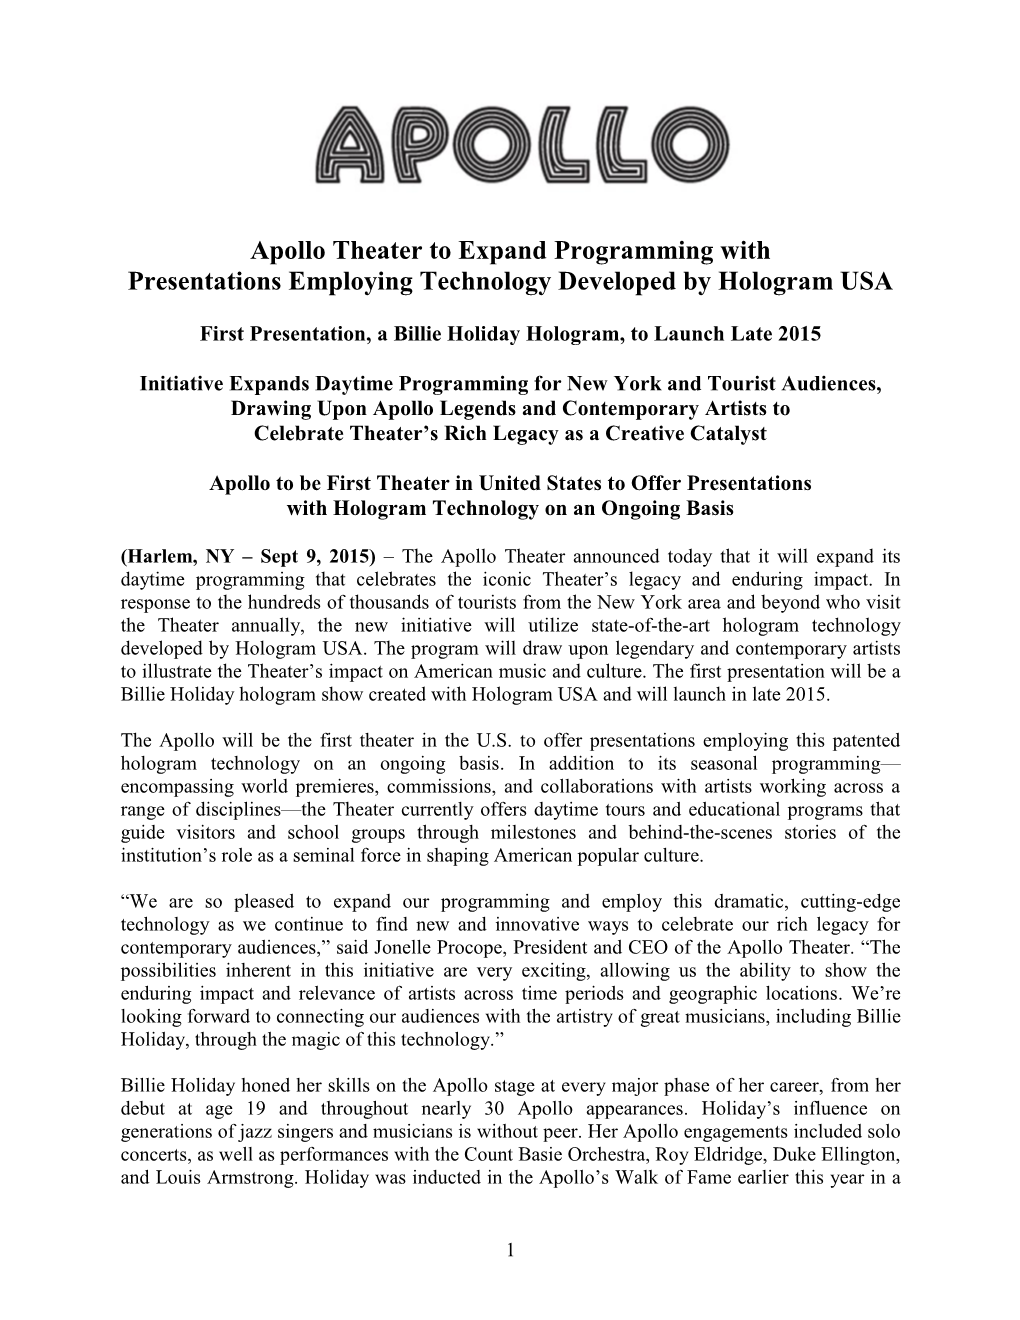 Apollo Theater to Expand Programming with Presentations Employing Technology Developed by Hologram USA